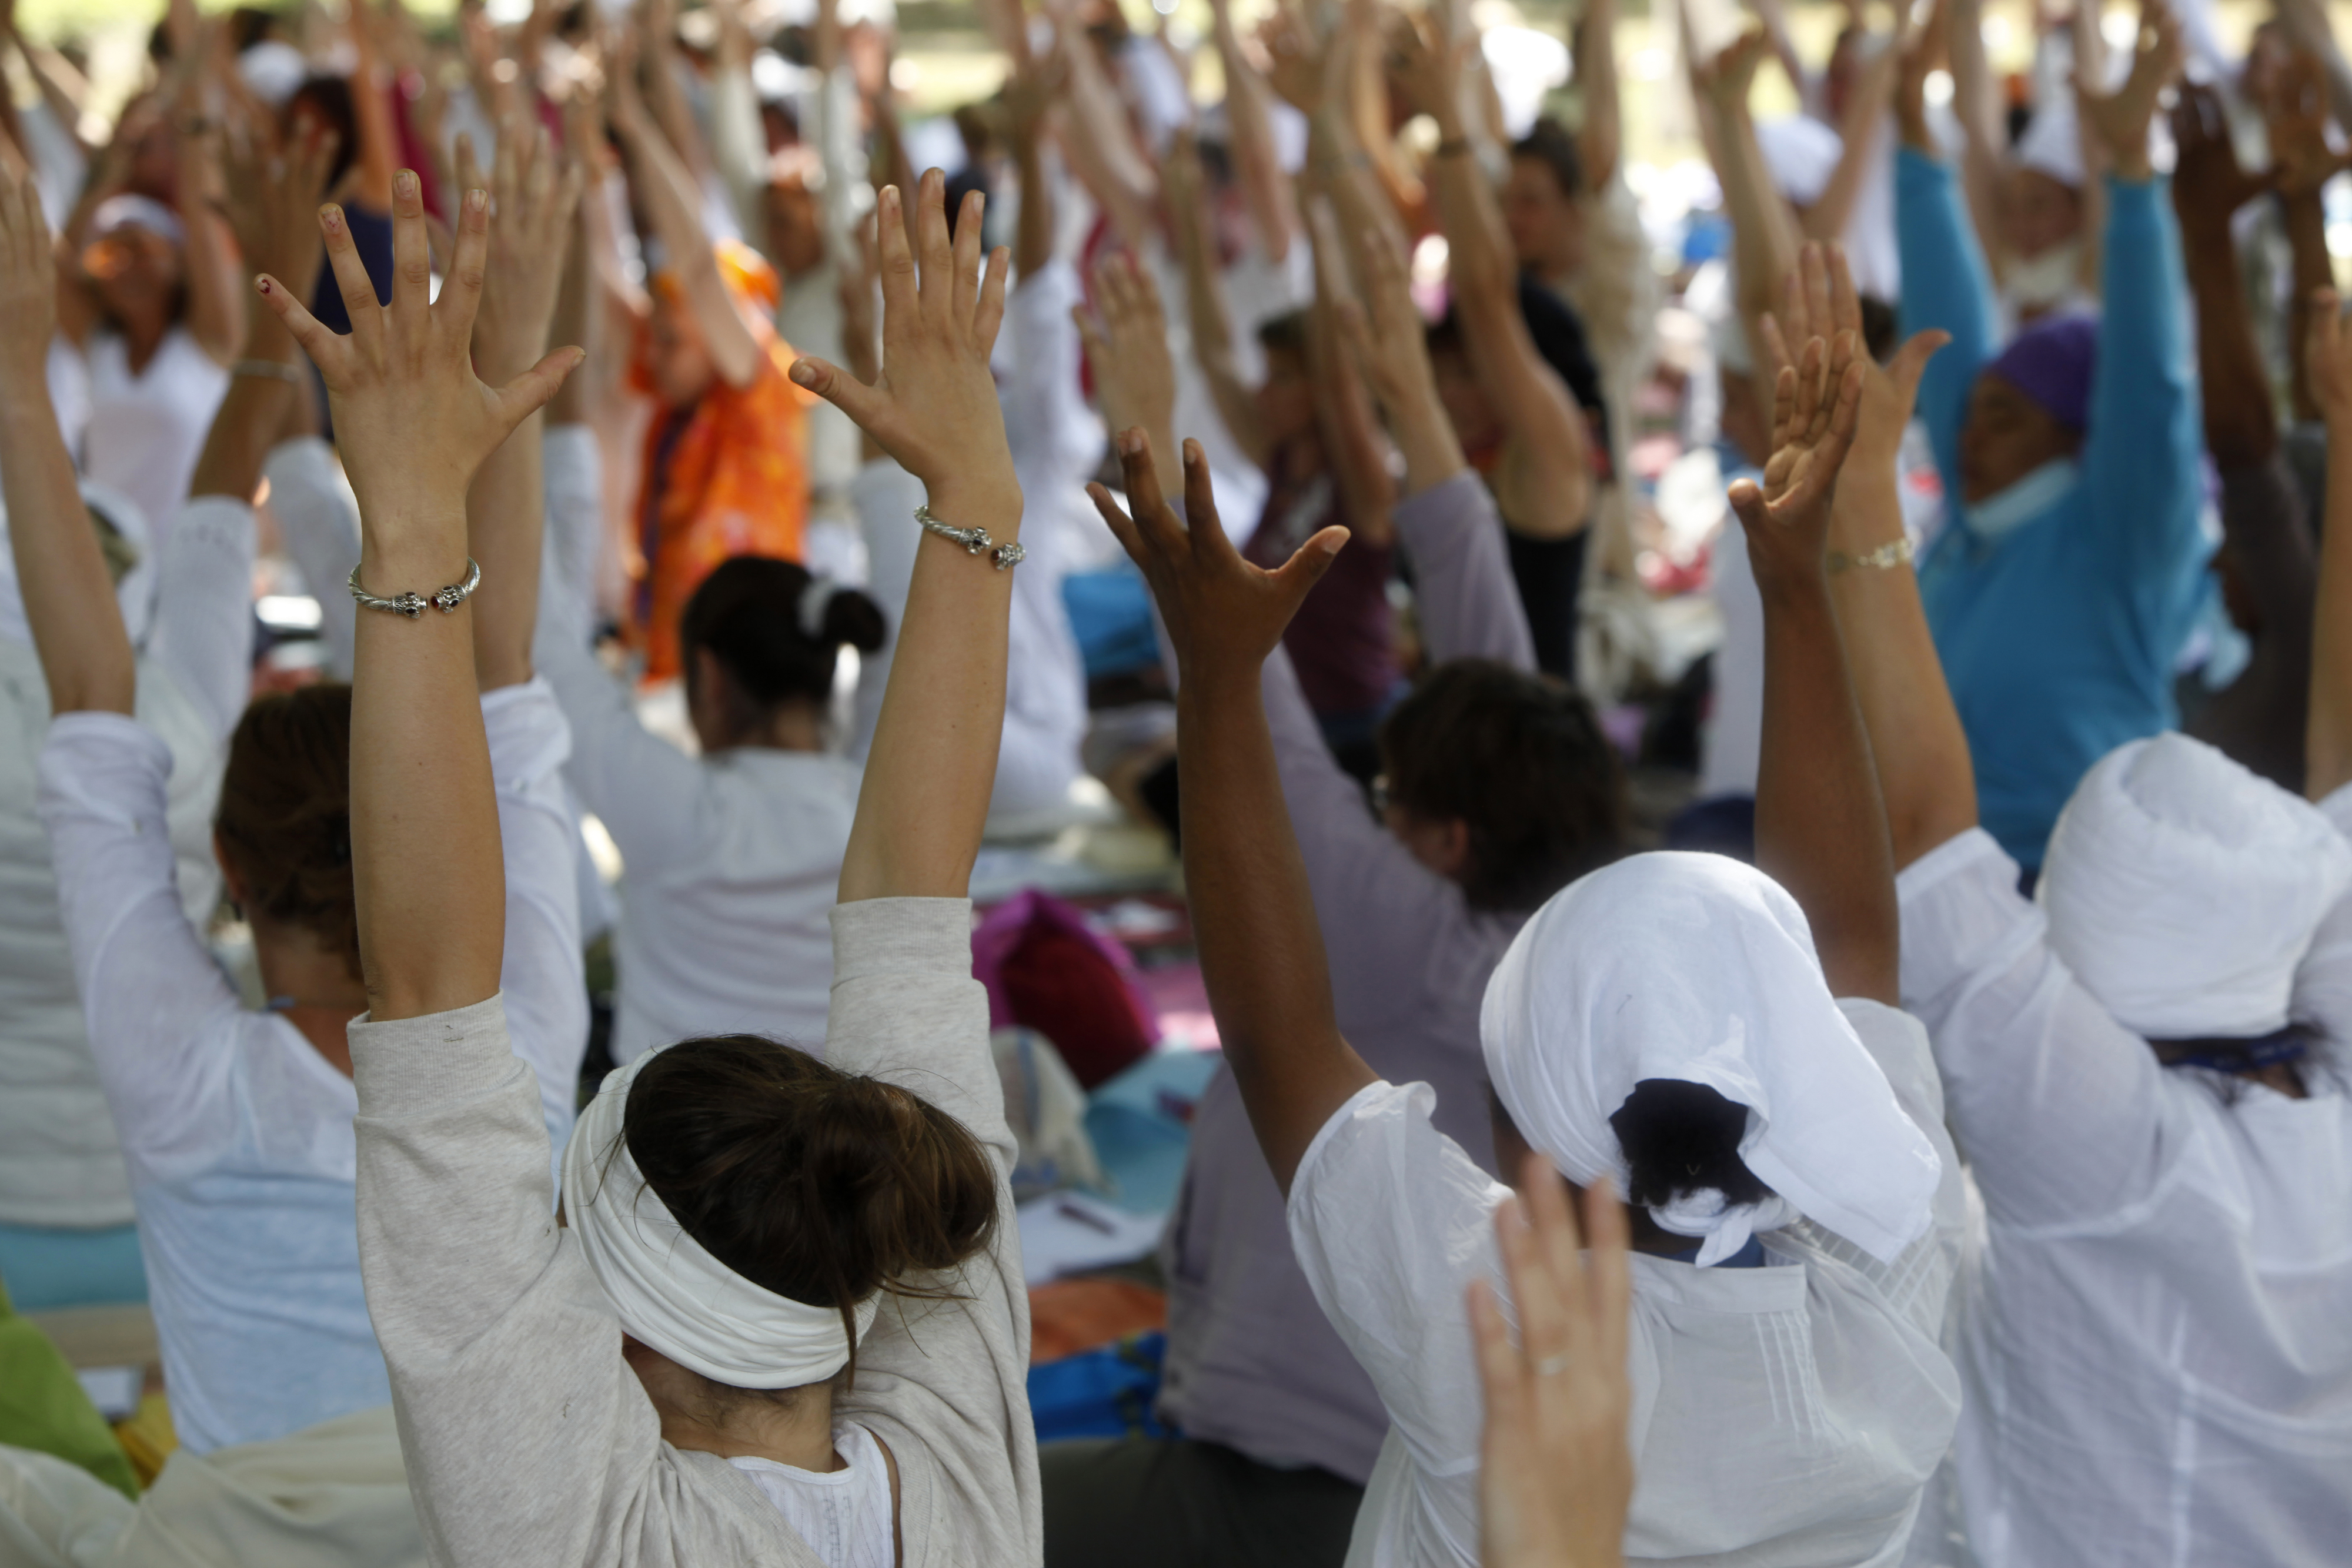 Group of people in white clothing with arms raised in a yoga pose, promoting wellness and community